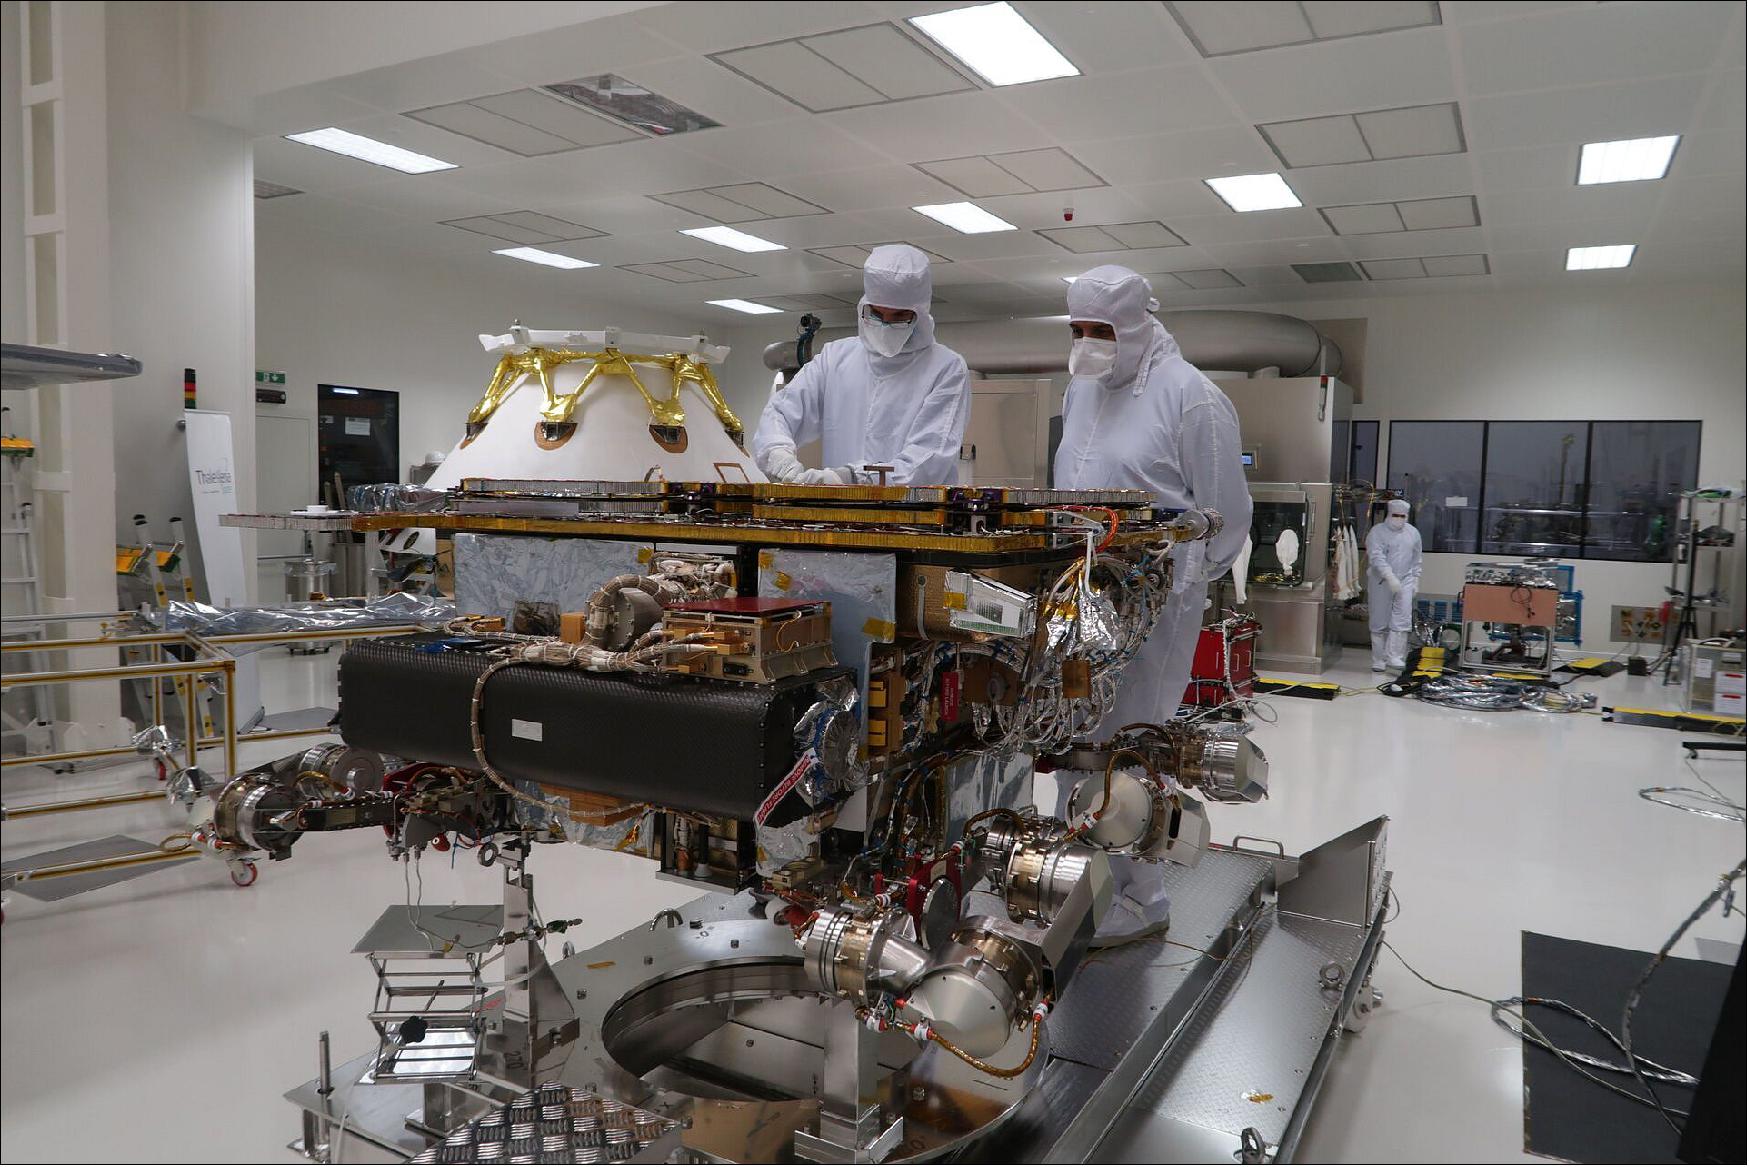 Figure 41: Workers remained fully shrouded within ‘bunny suits’ to control any kind of contamination during the packing of the ExoMars elements before shipment. In this image, two engineers work on ESA’s Rosalind Franklin rover with its solar panels and drill folded. The white capsule with golden legs in the background corresponds to the carrier module integrated with the Russian surface platform, dubbed Kazachok. These two elements will reunite with the rover in Cannes at the end of October (image credit: Thales Alenia Space)